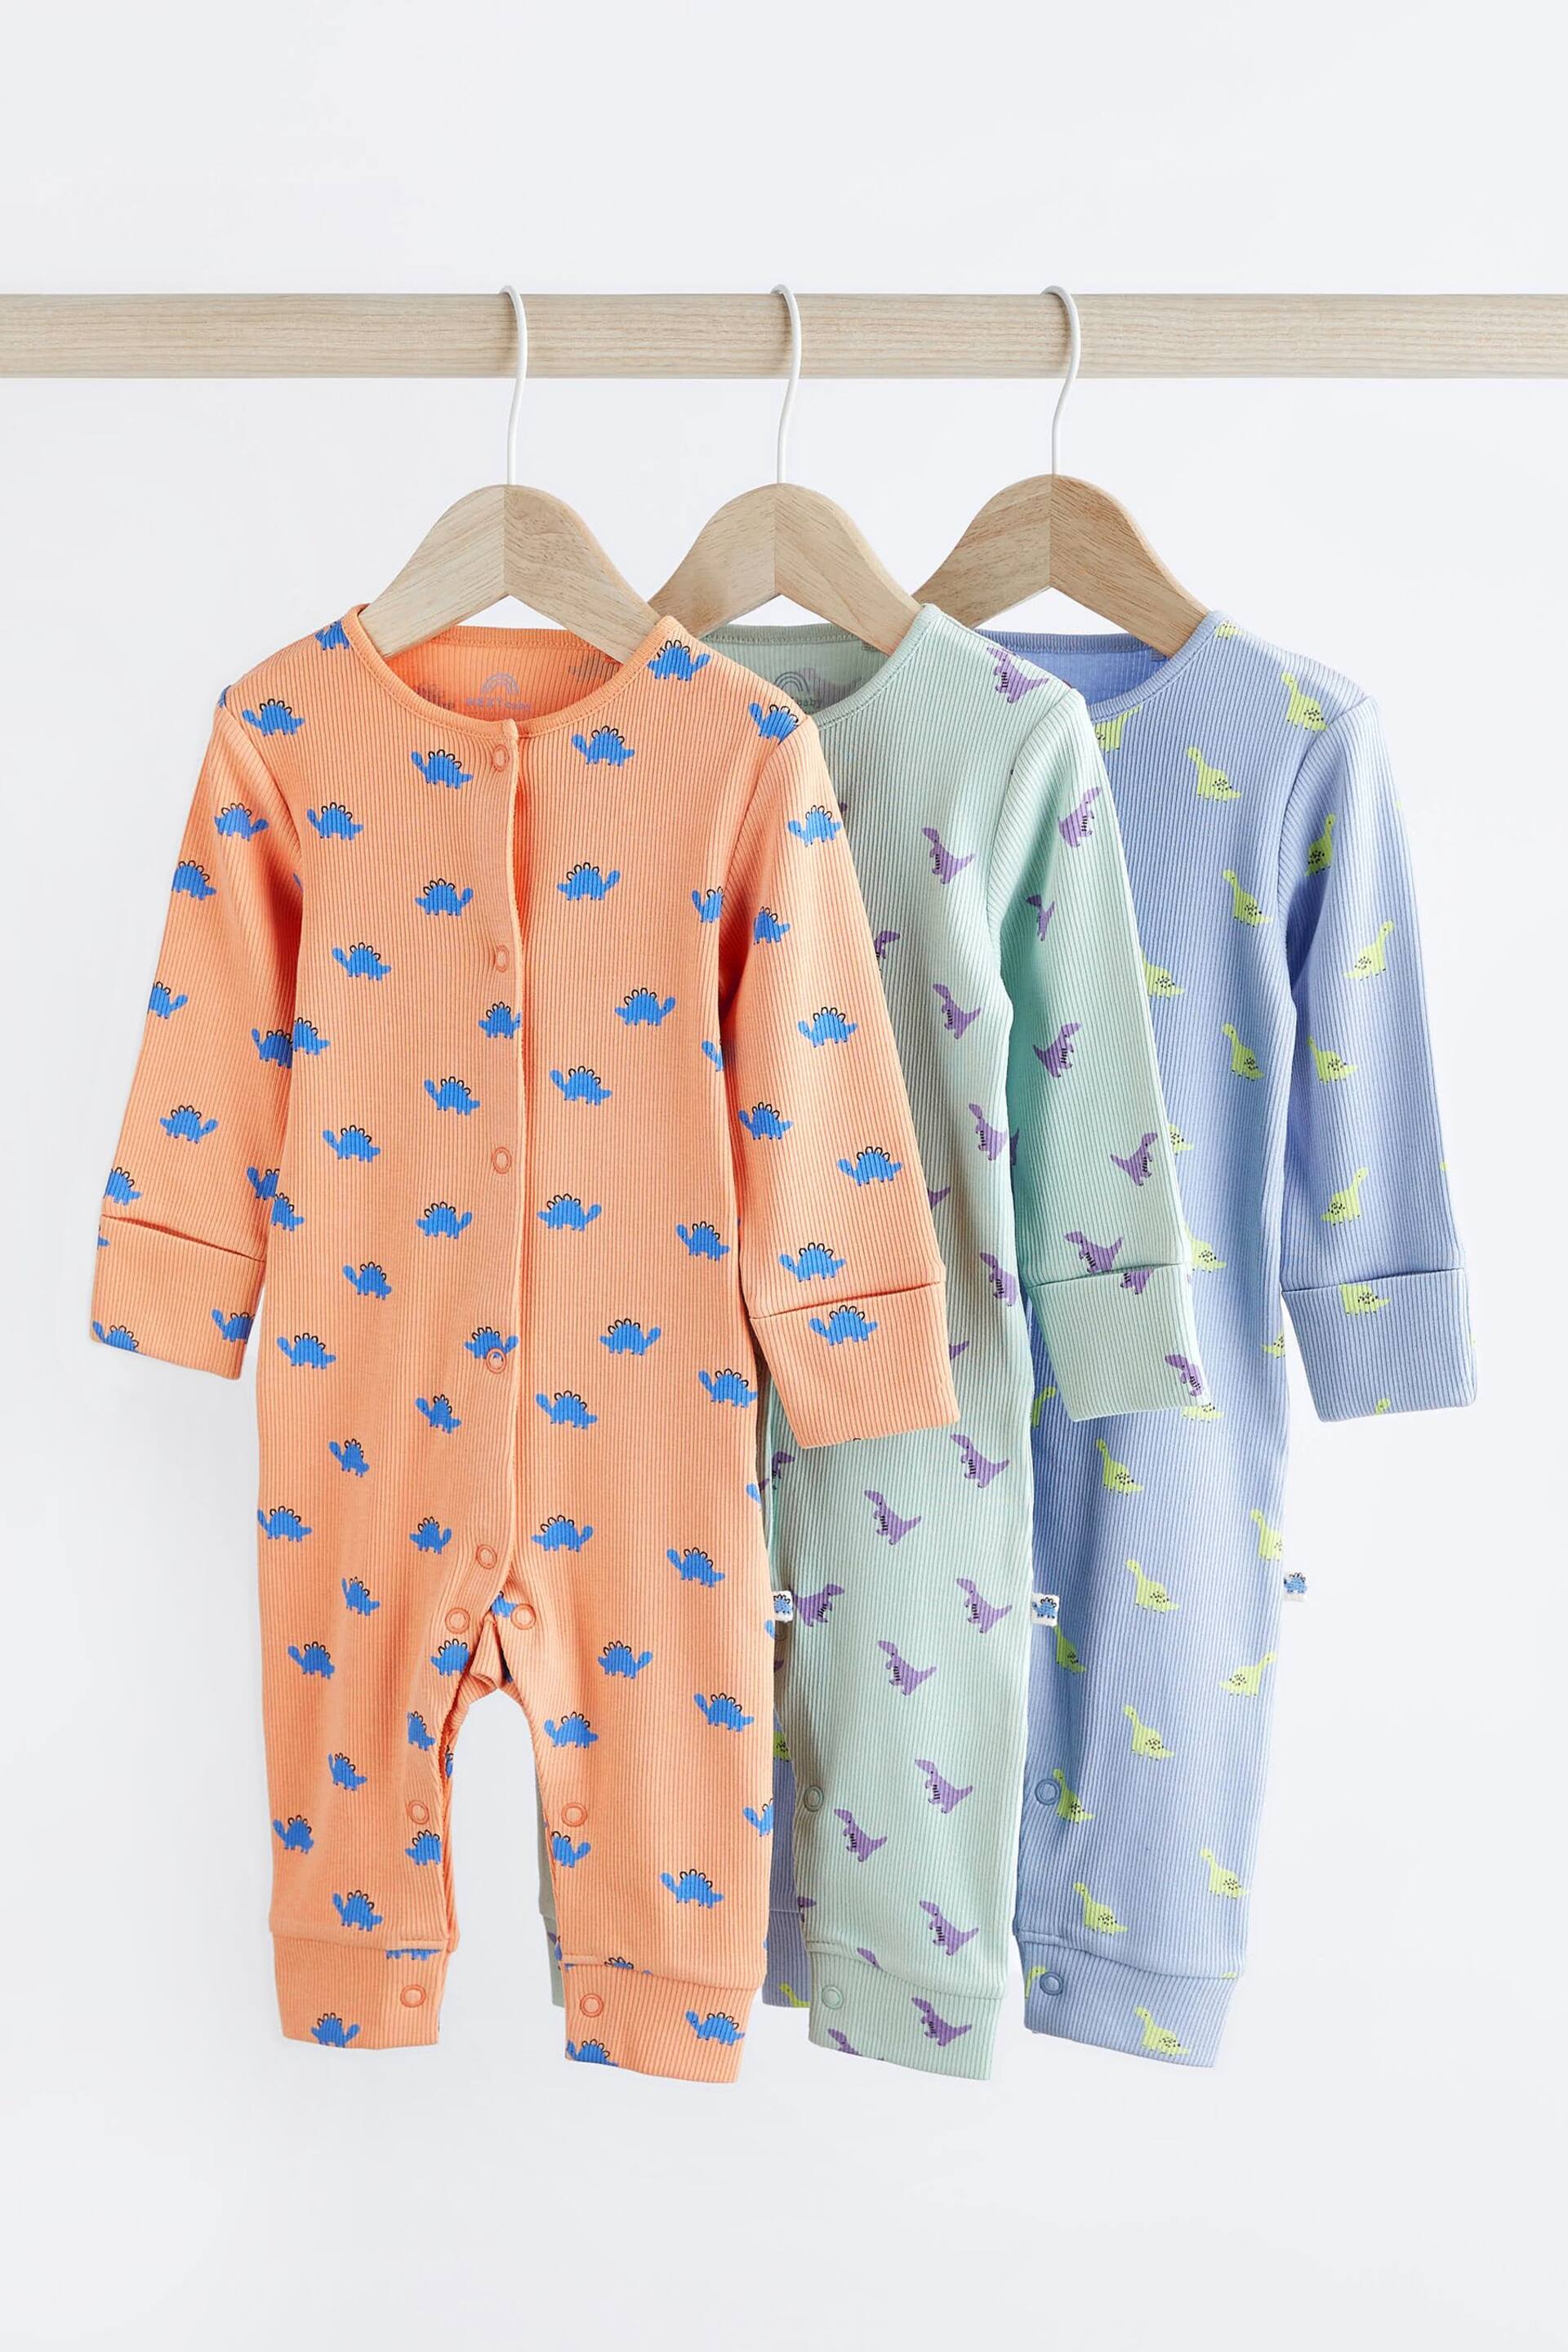 Bright Miniprint Dino Footless Baby Sleepsuit 3 Pack (0mths-3yrs) - Image 1 of 13